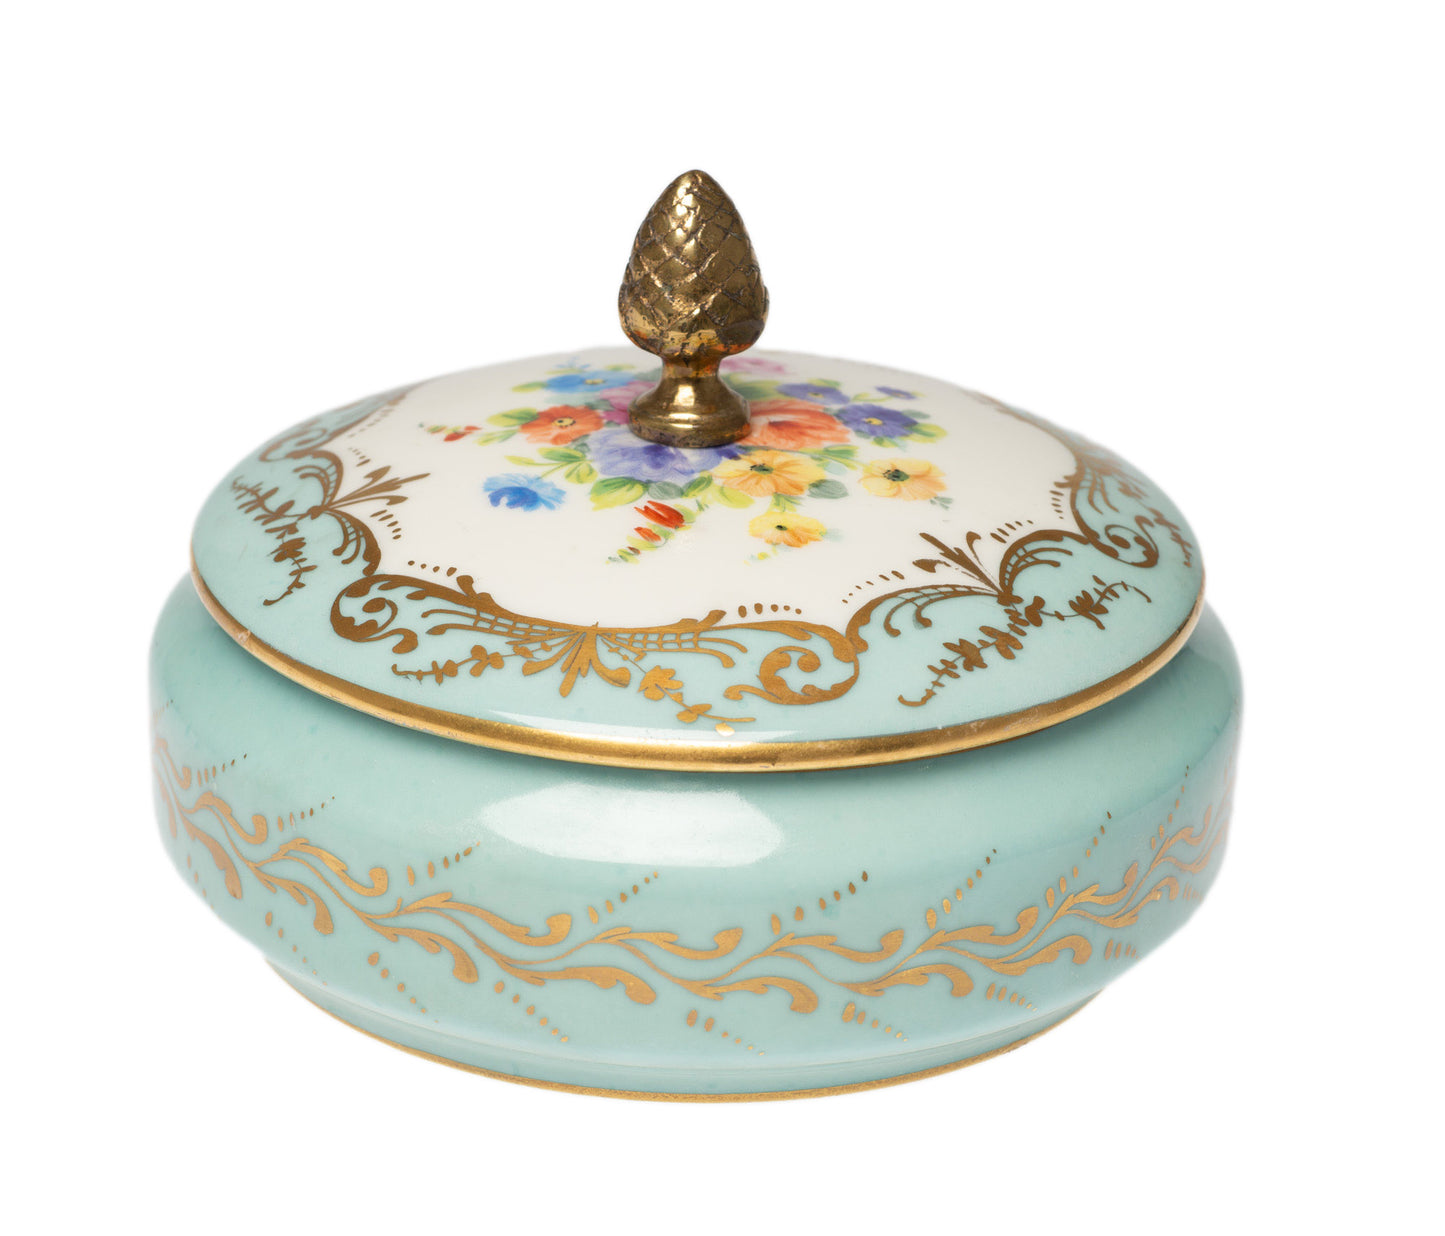 Atelier Camille Le Tallec Limoges Porcelain Hand Painted Lidded Jar - Turquoise (Code 2549)